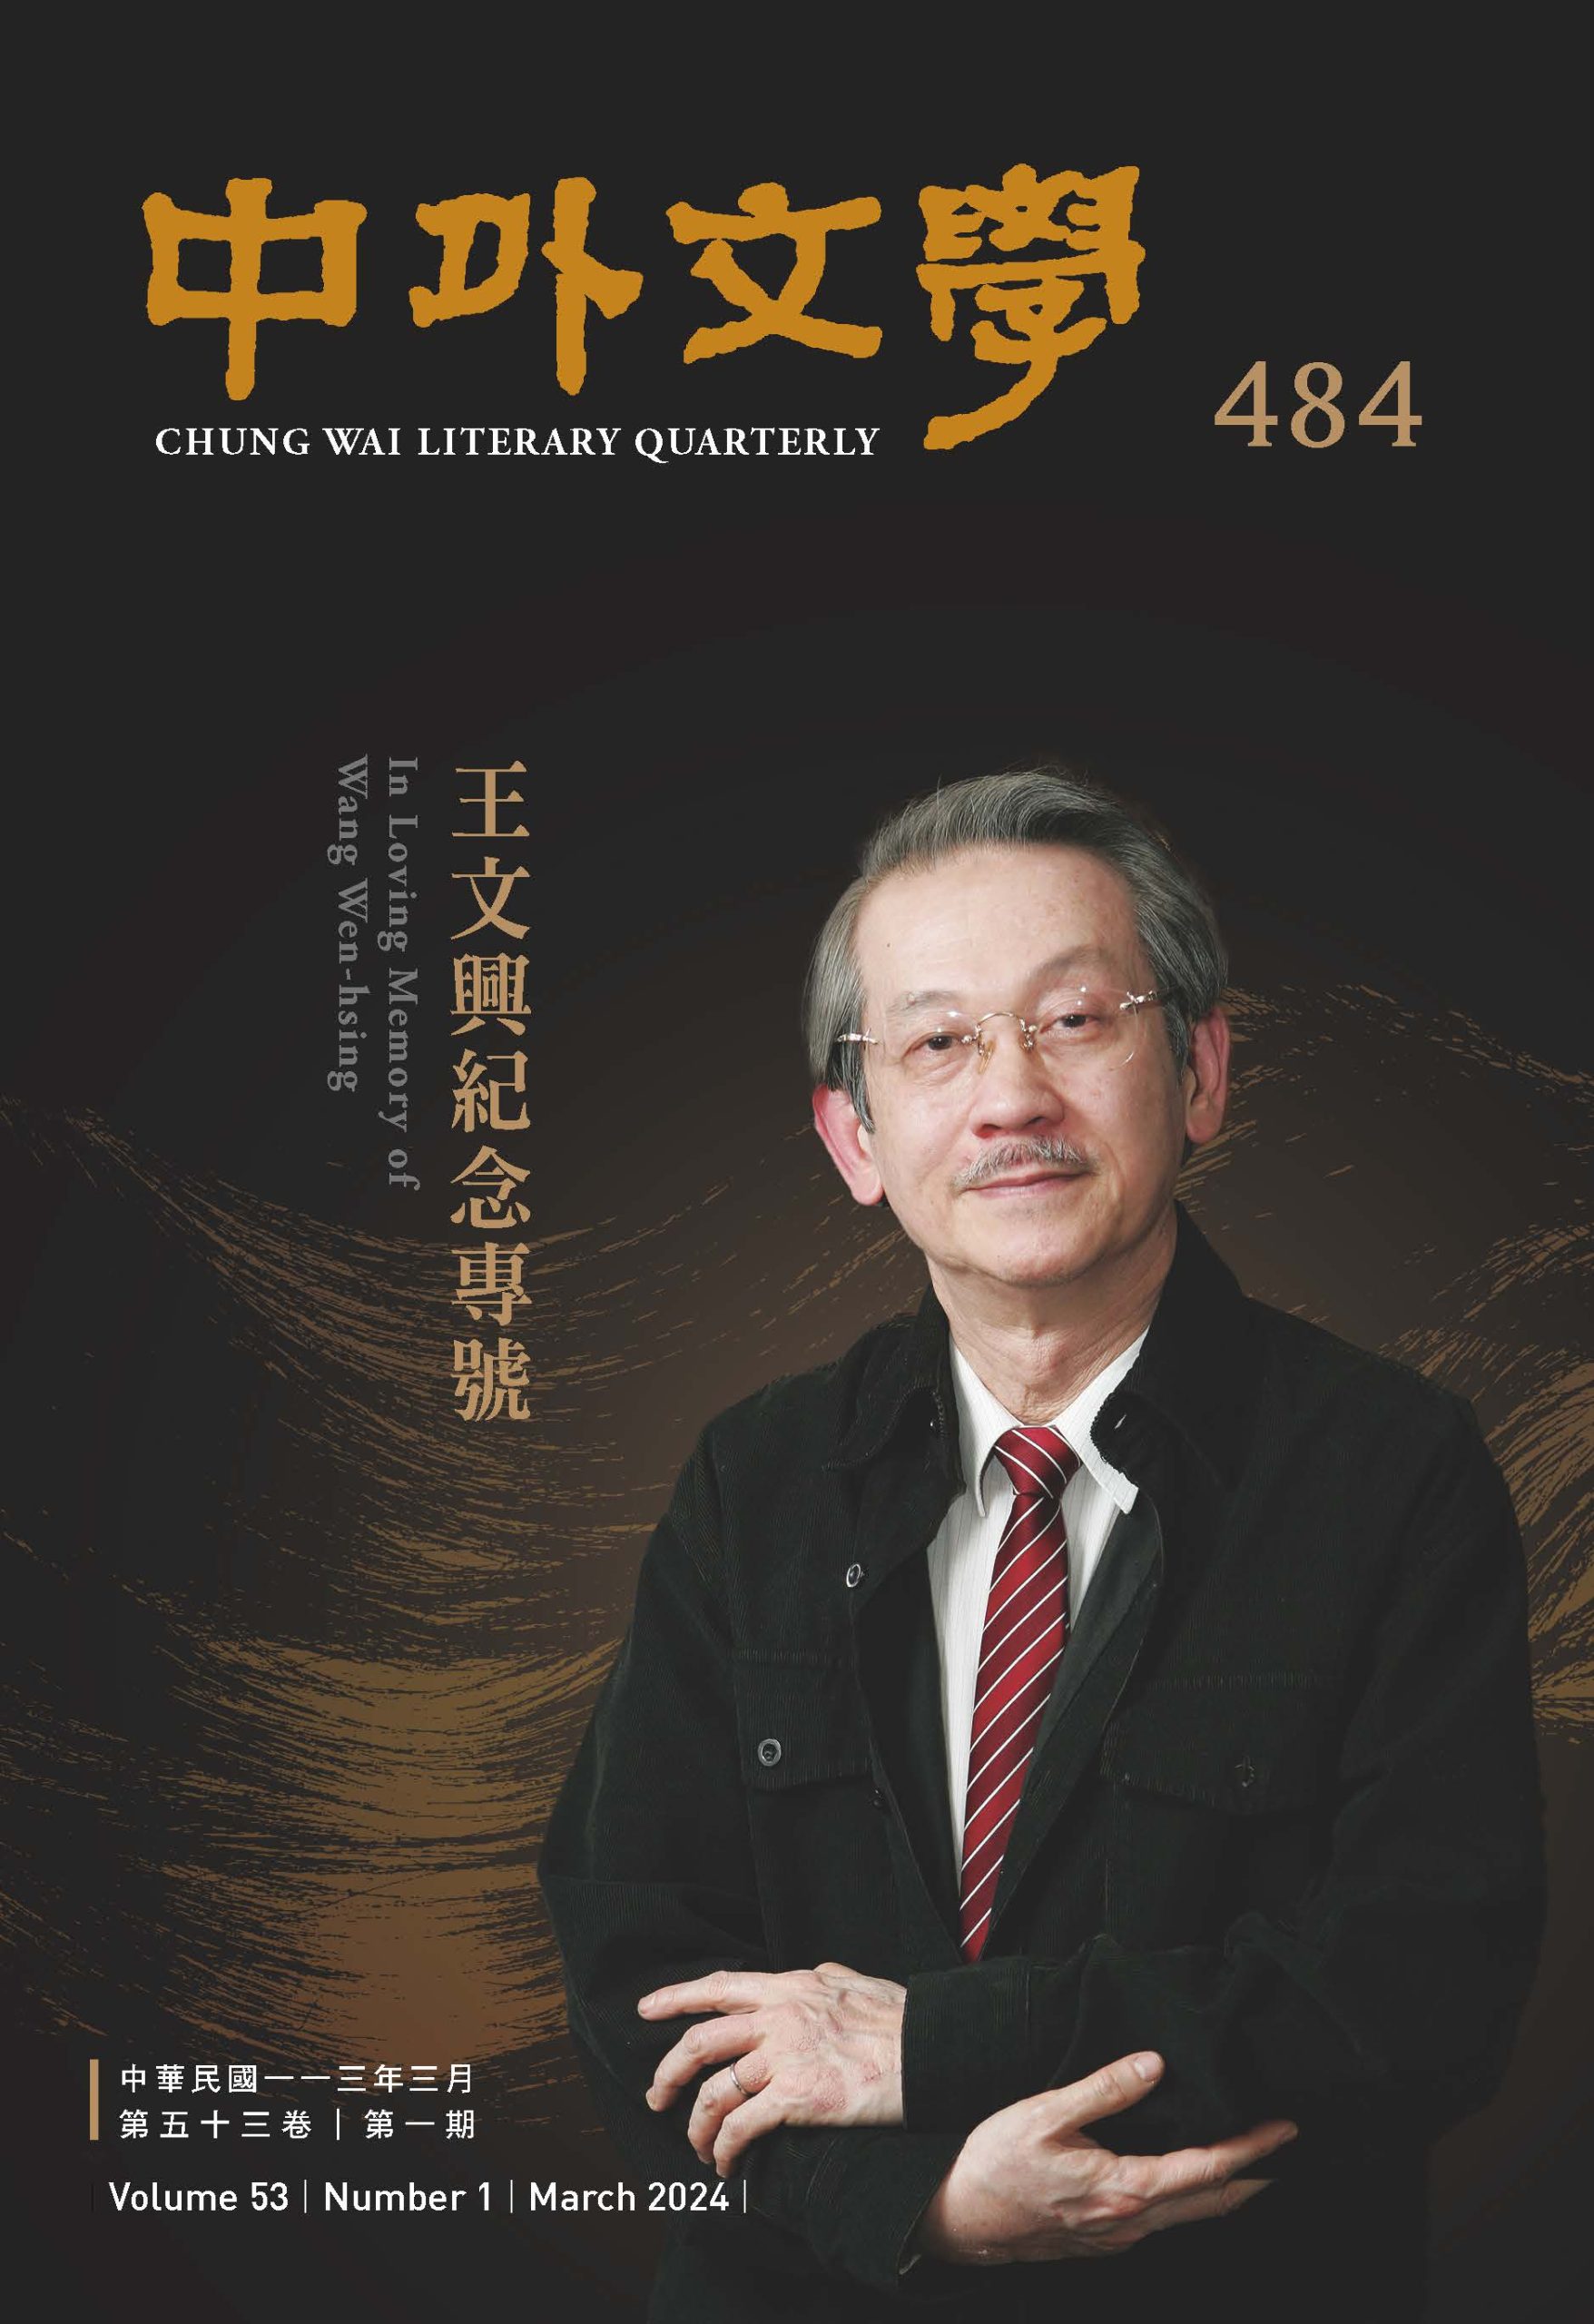 The March issue of Chung Wai Literary Quarterly--In Loving Memory of Wang Wen-hsing--has been released.